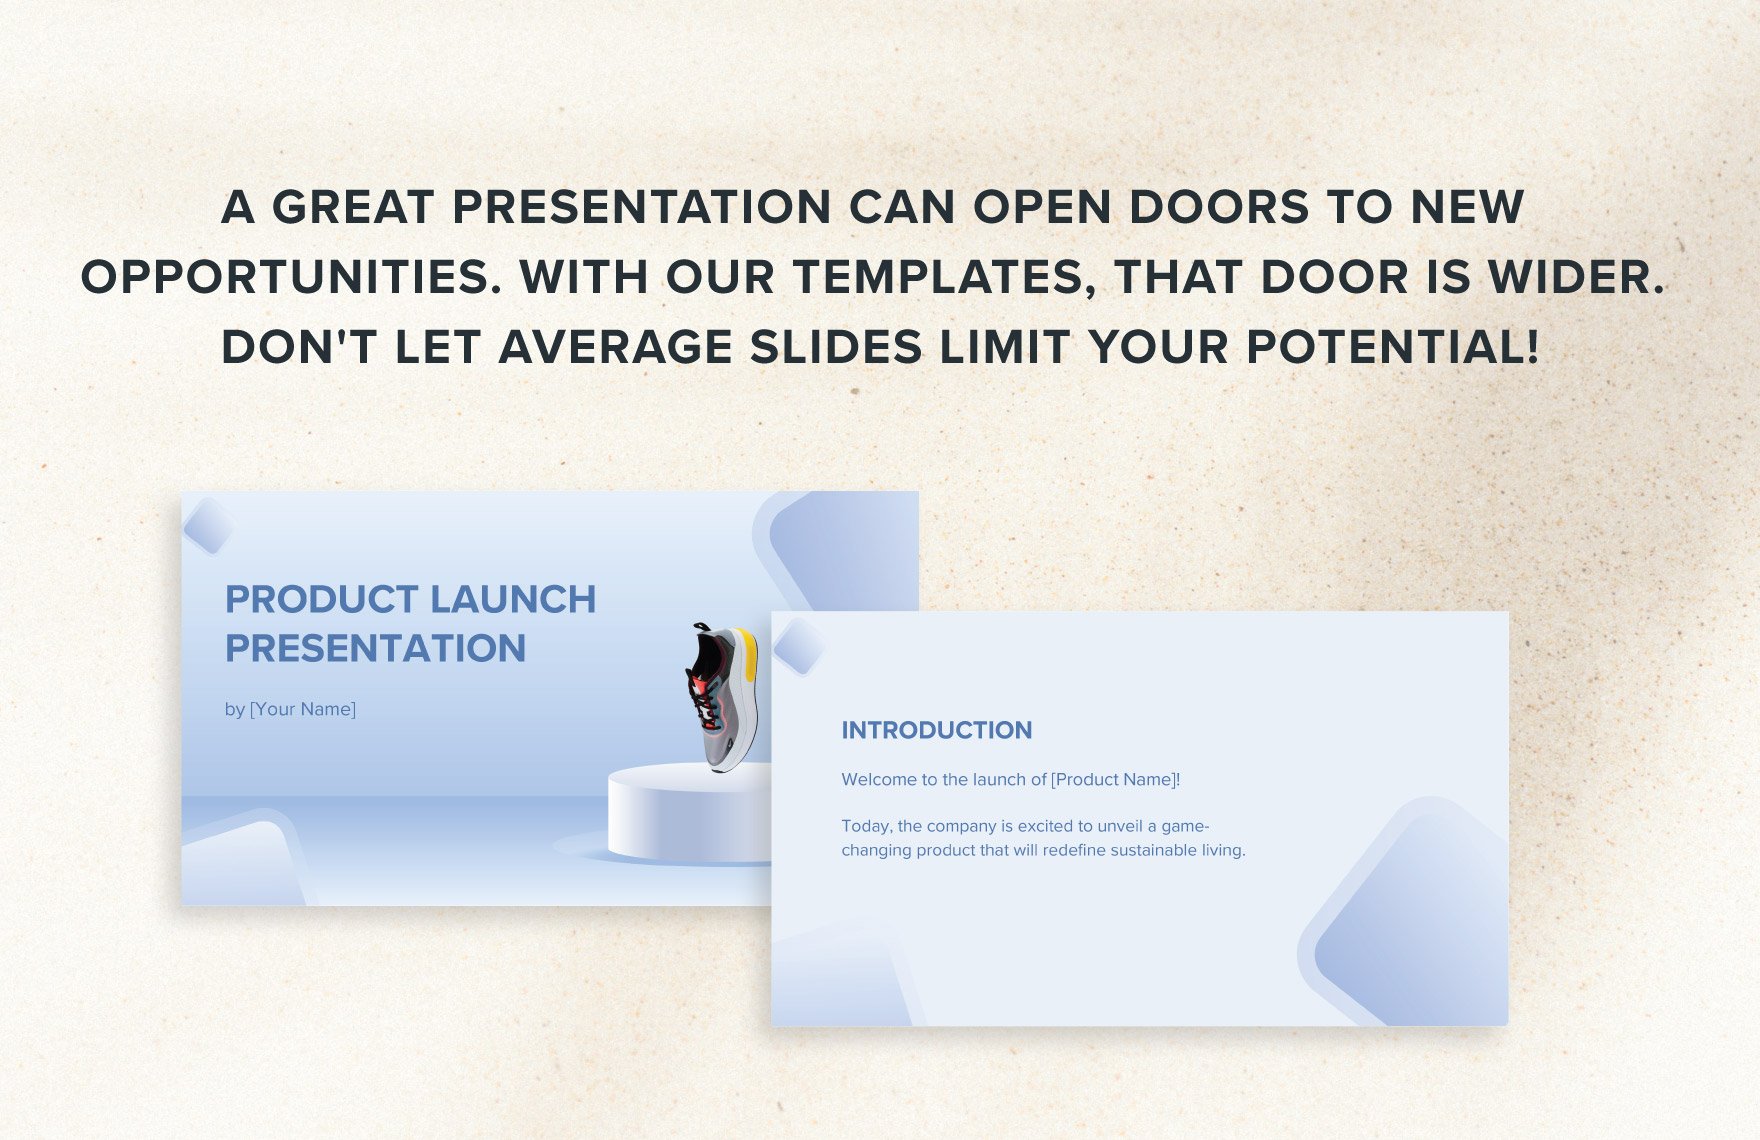 Product Launch Presentation Template